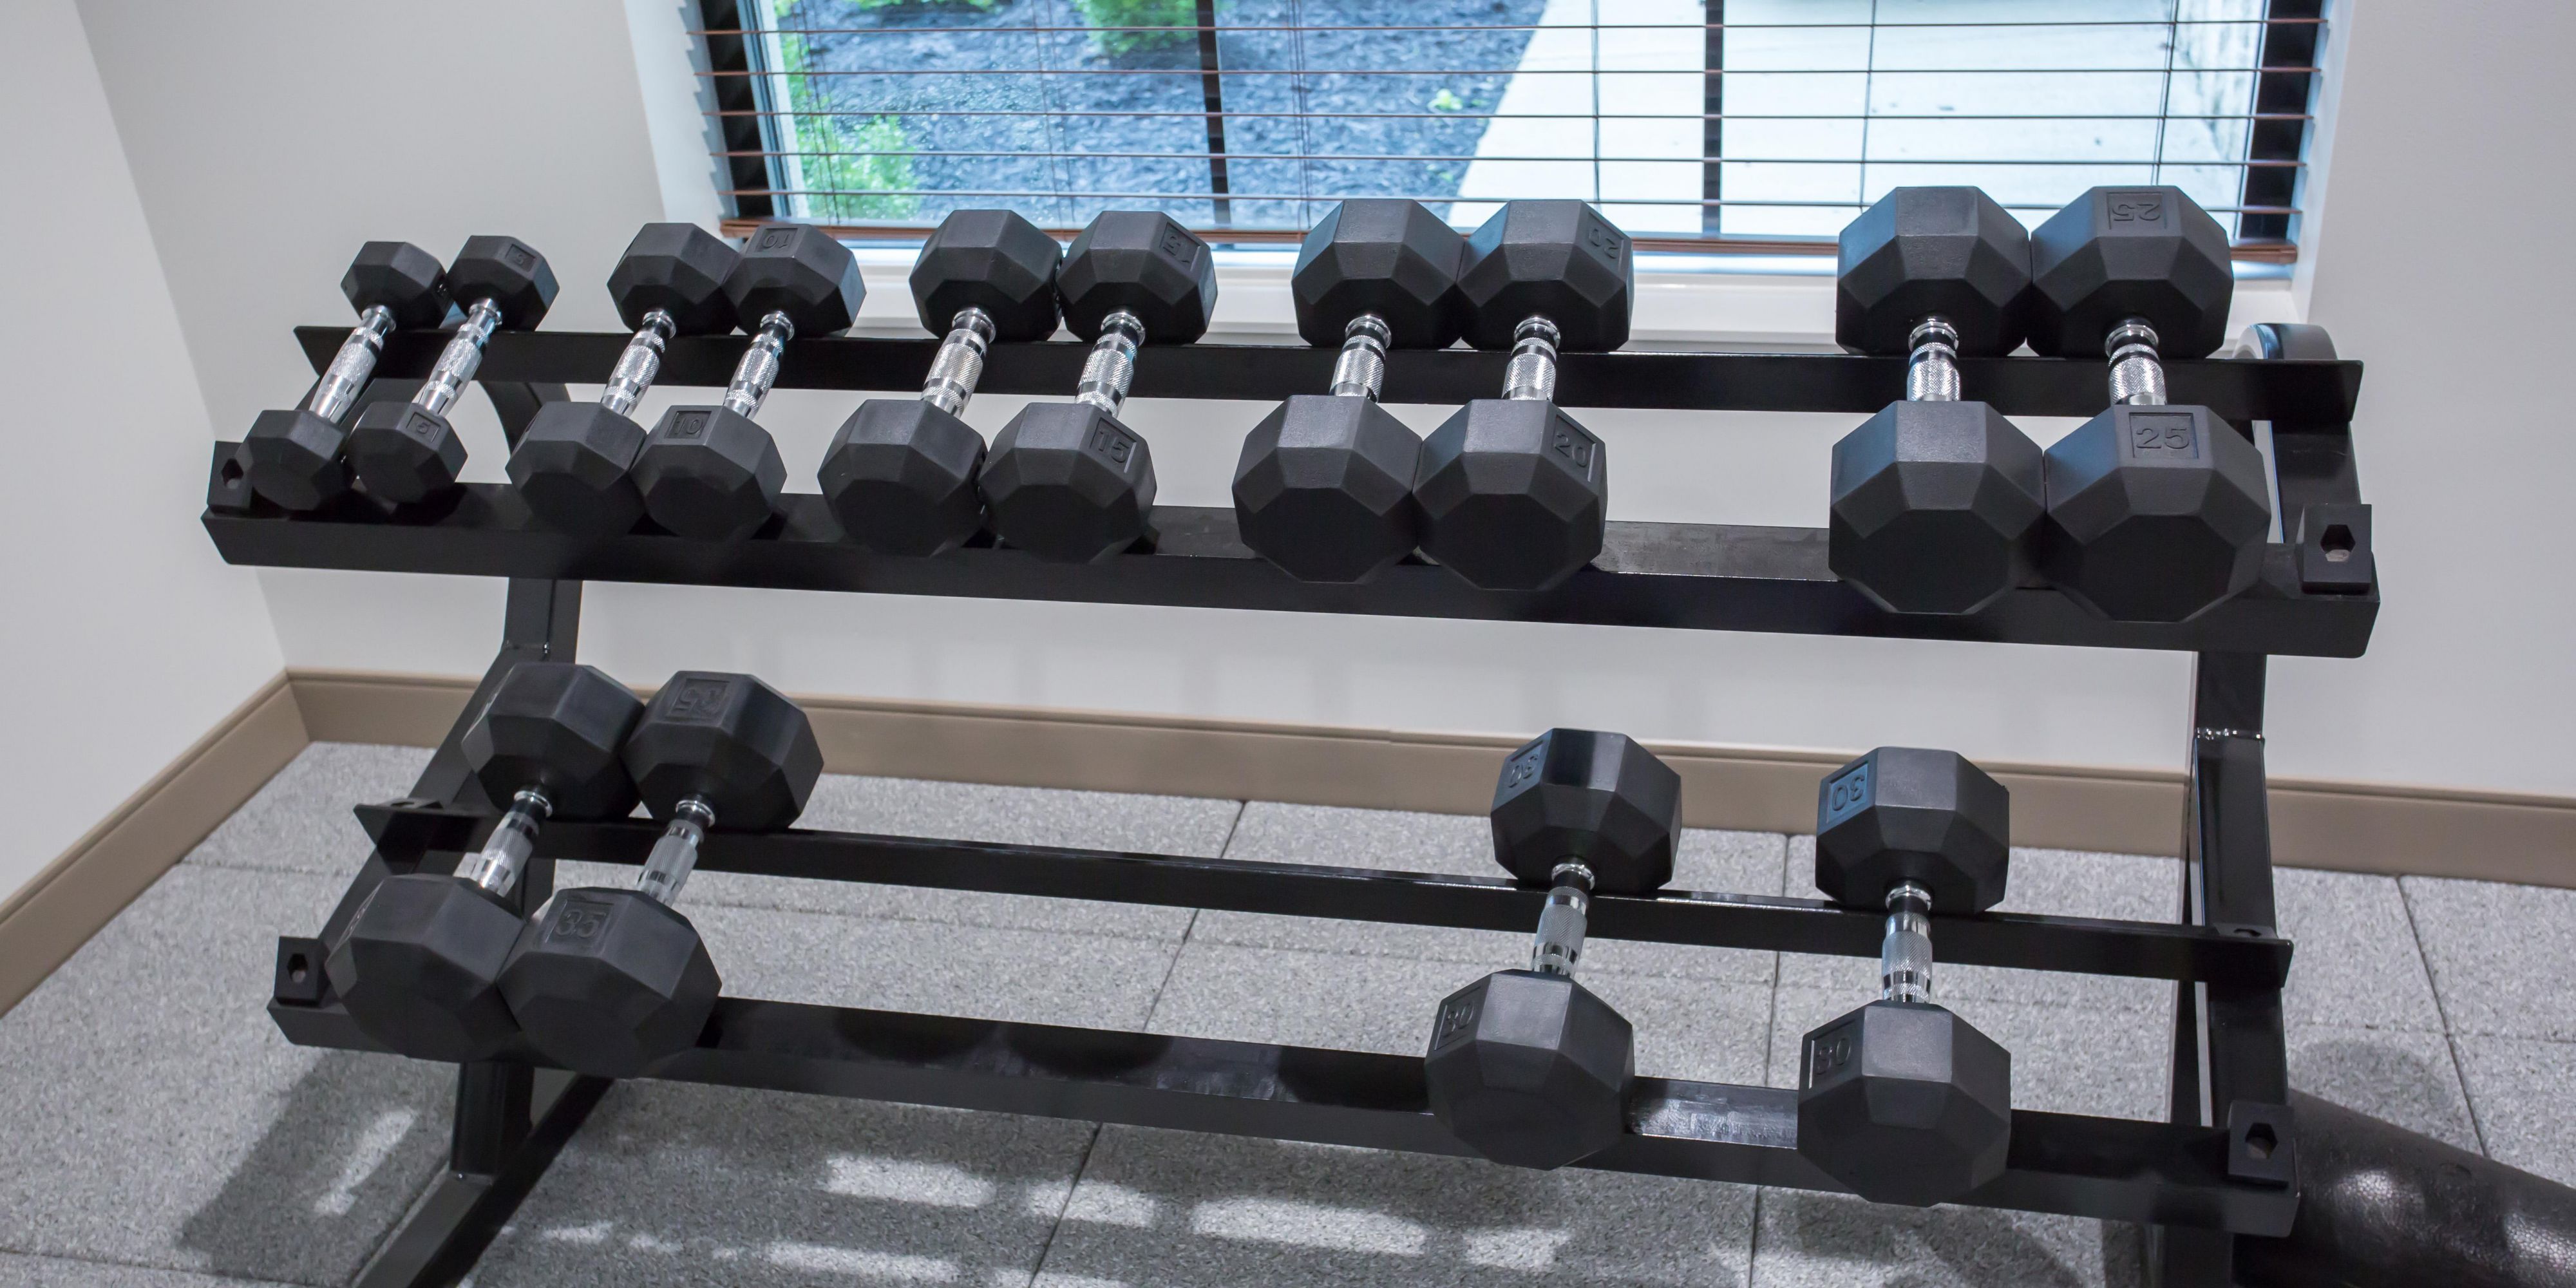 24/7 free fully-equipped Fitness Center at Staybridge Suites.